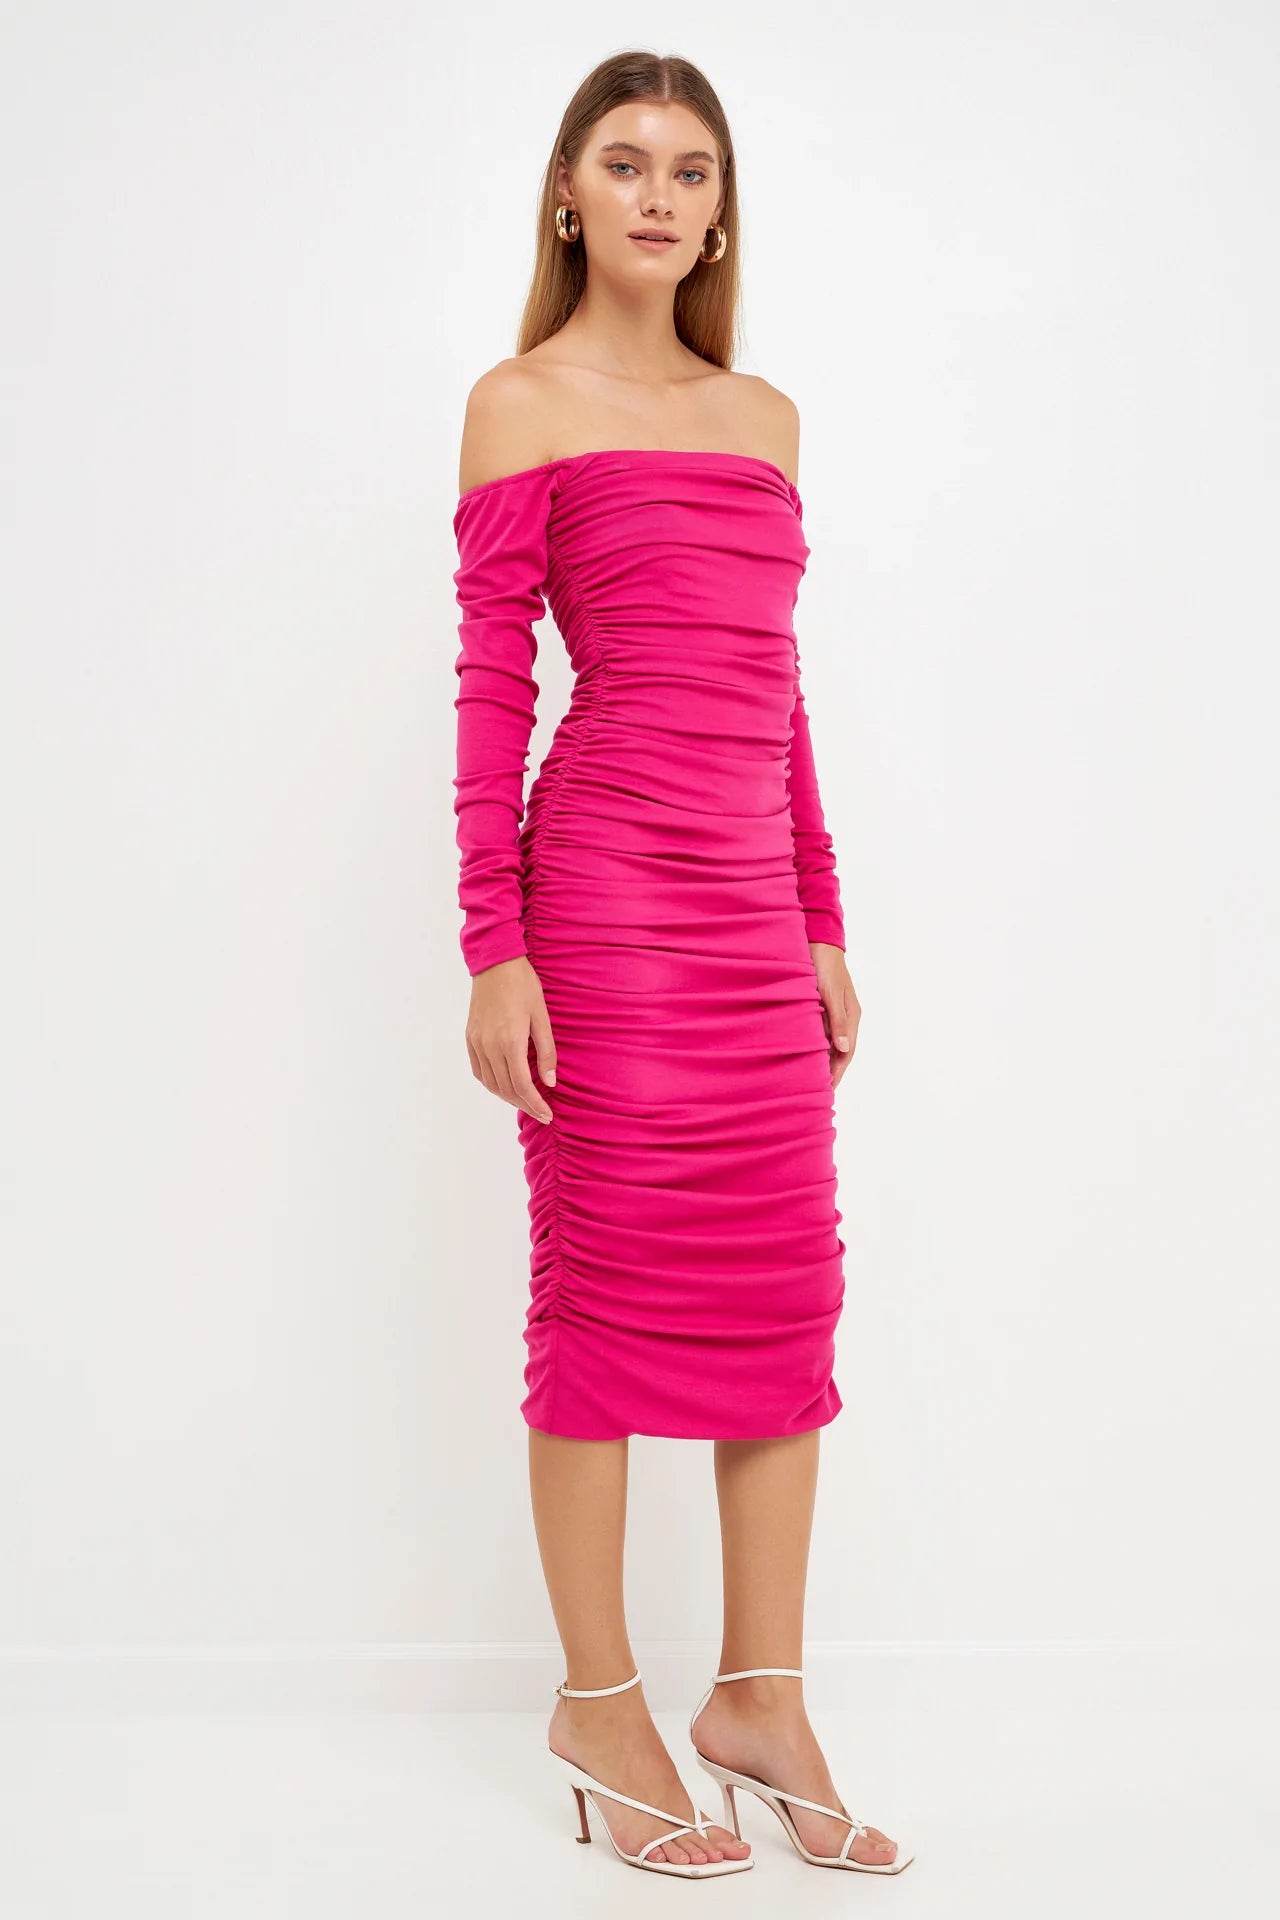 Endless Rose - Off-The-Shoulder Ruched Midi Dress - Dresses in Women's Clothing available at endlessrose.com